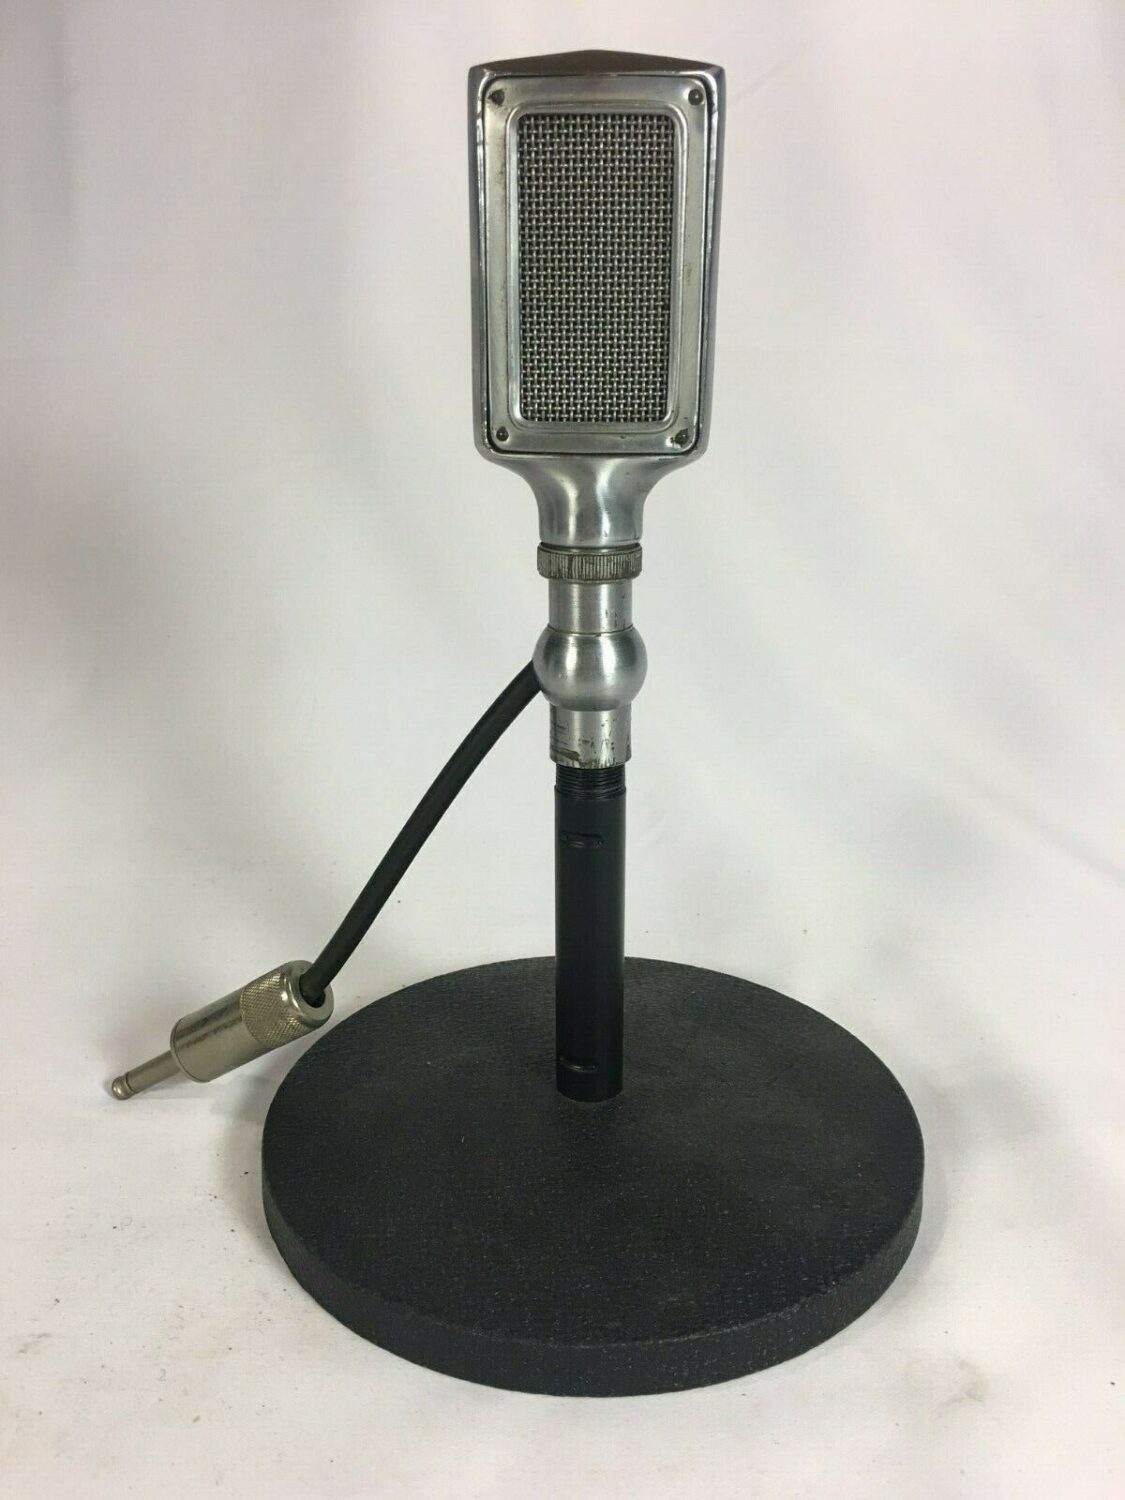 Pentron antique Crystal microphone